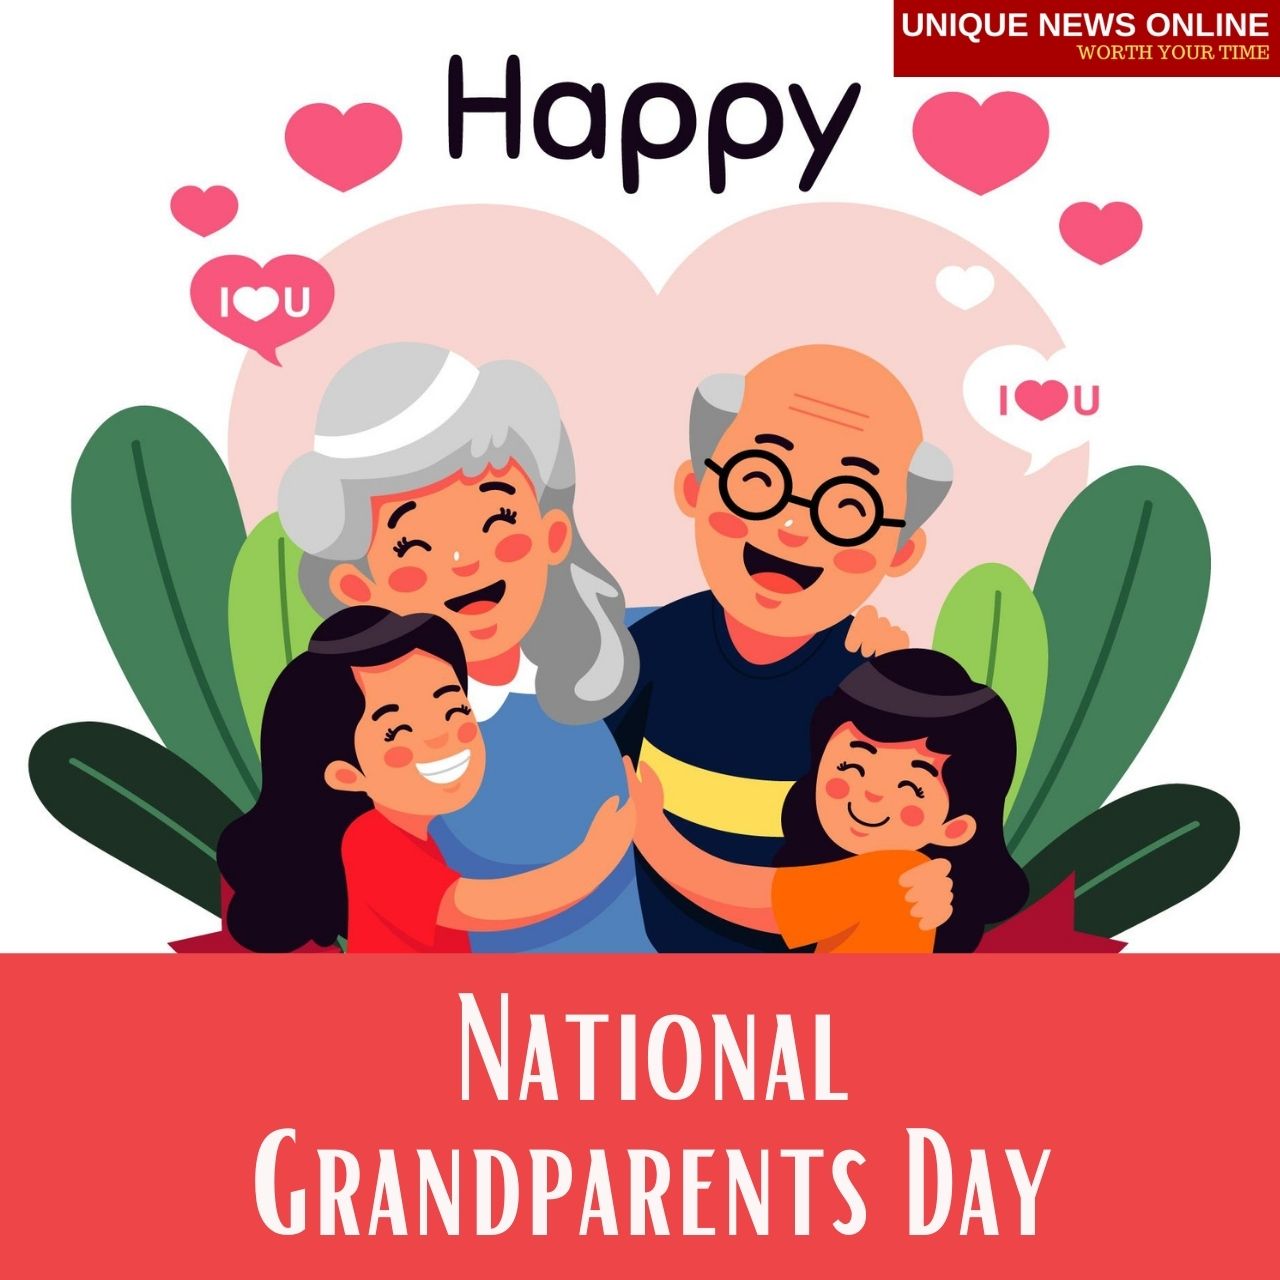 National Grandparents Day (US) 2021 Wishes, HD Images, Quotes